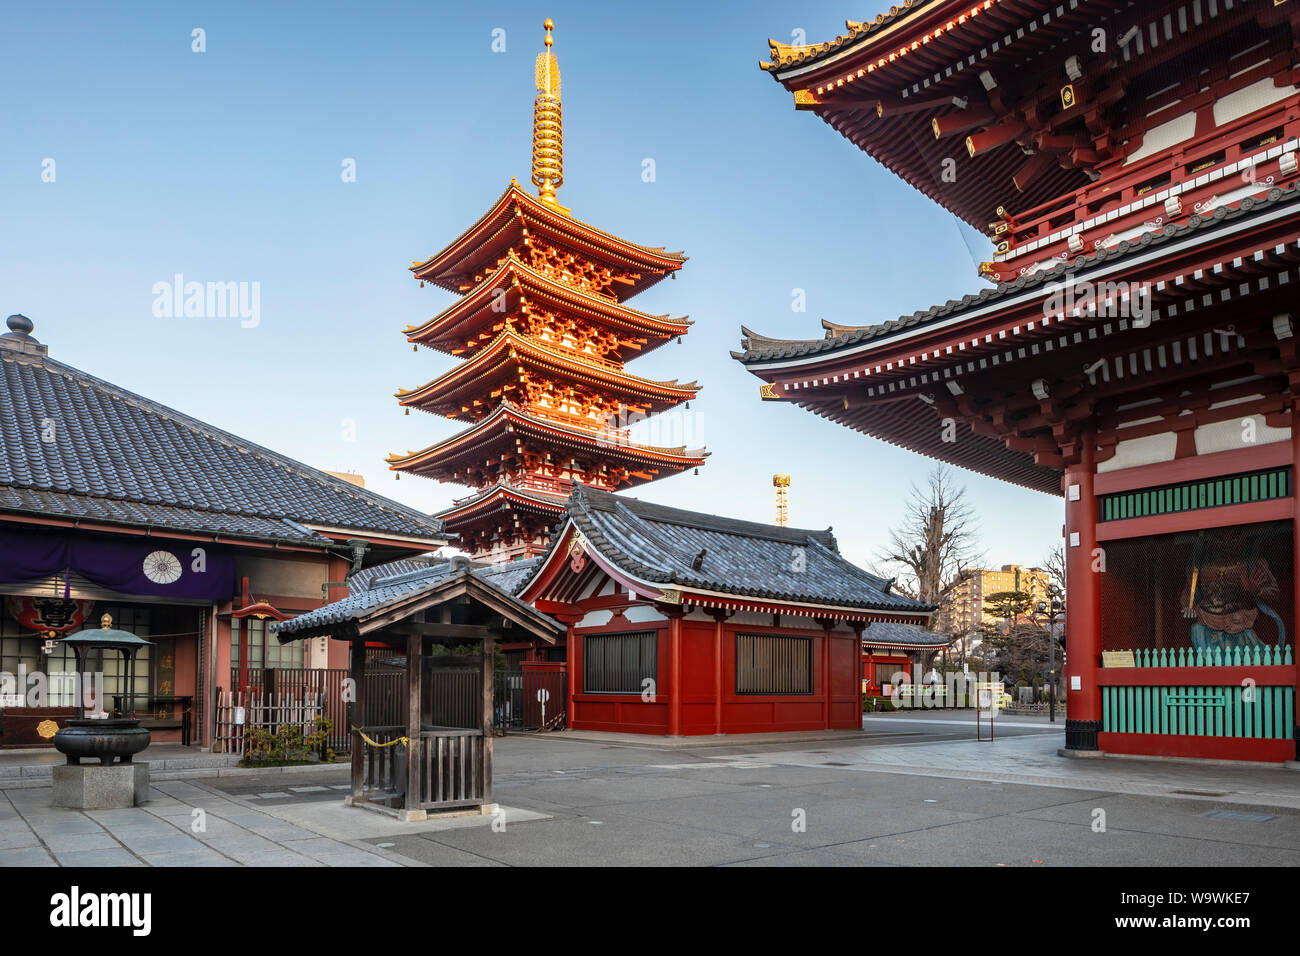 Senso-ji temple in the city of Tokyo, Japan. An ancient Buddhist temple in the Asakusa district of Tokyo, Senso-ji is the most widely visited spiritua Stock Photo